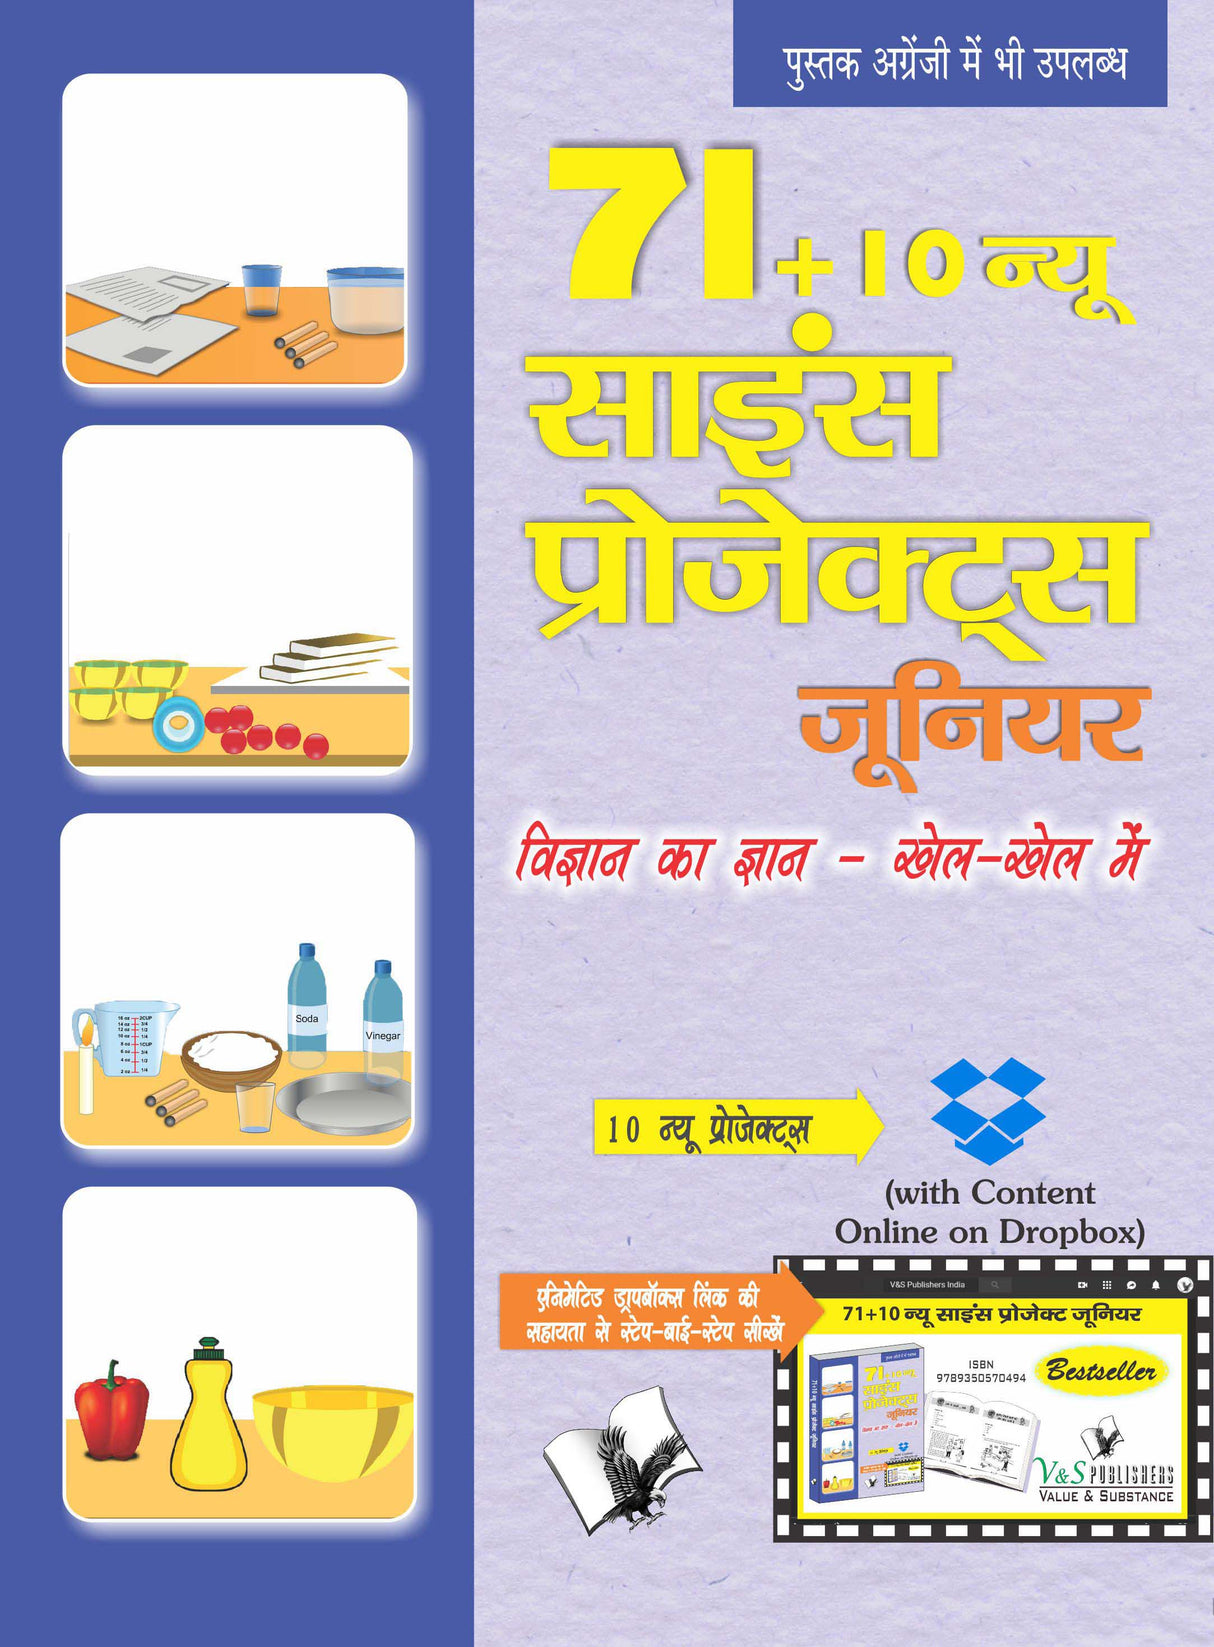 71+10 New Science Project Junior  (With Online Content on Dropbox): Conduct practical experiments on your classroom learning - in Hindi